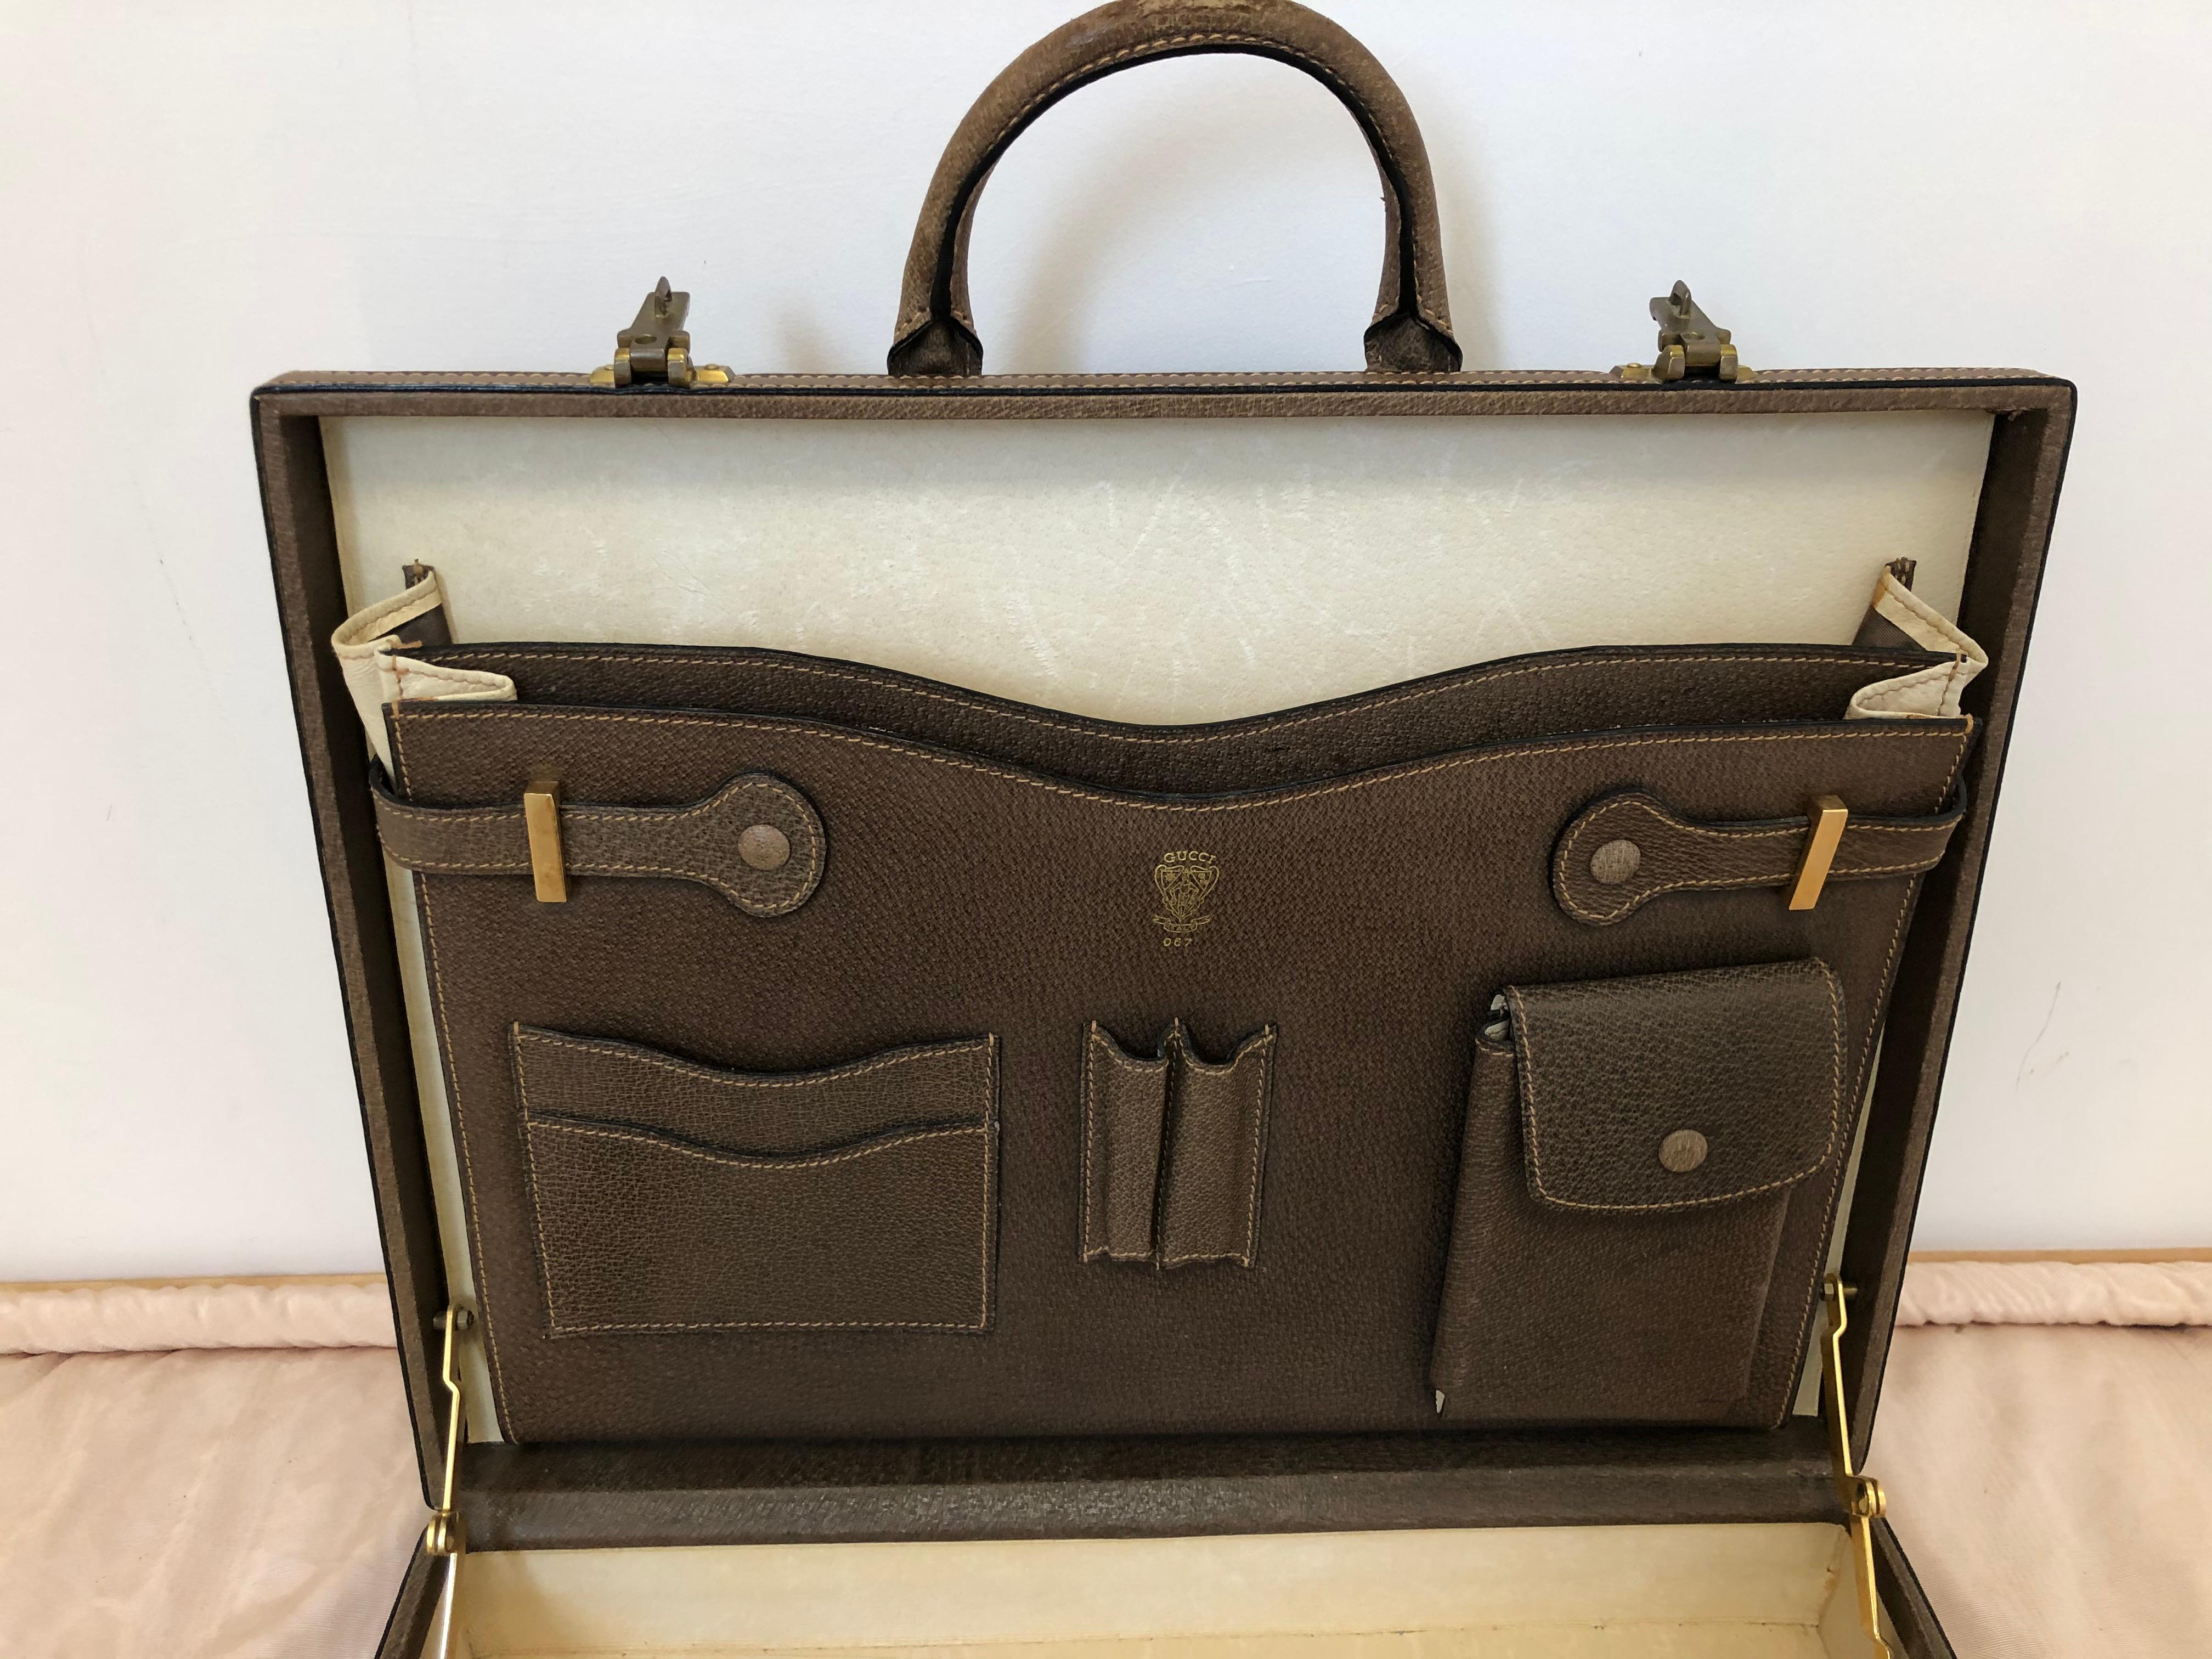 This Gucci briefcase is gorgeous in great vintage condition and practical as it will hold documents and a laptop.  It is a hard case, so will protect your equipment from harm. The briefcase comes with built-in compartments for pens, phone, cards,